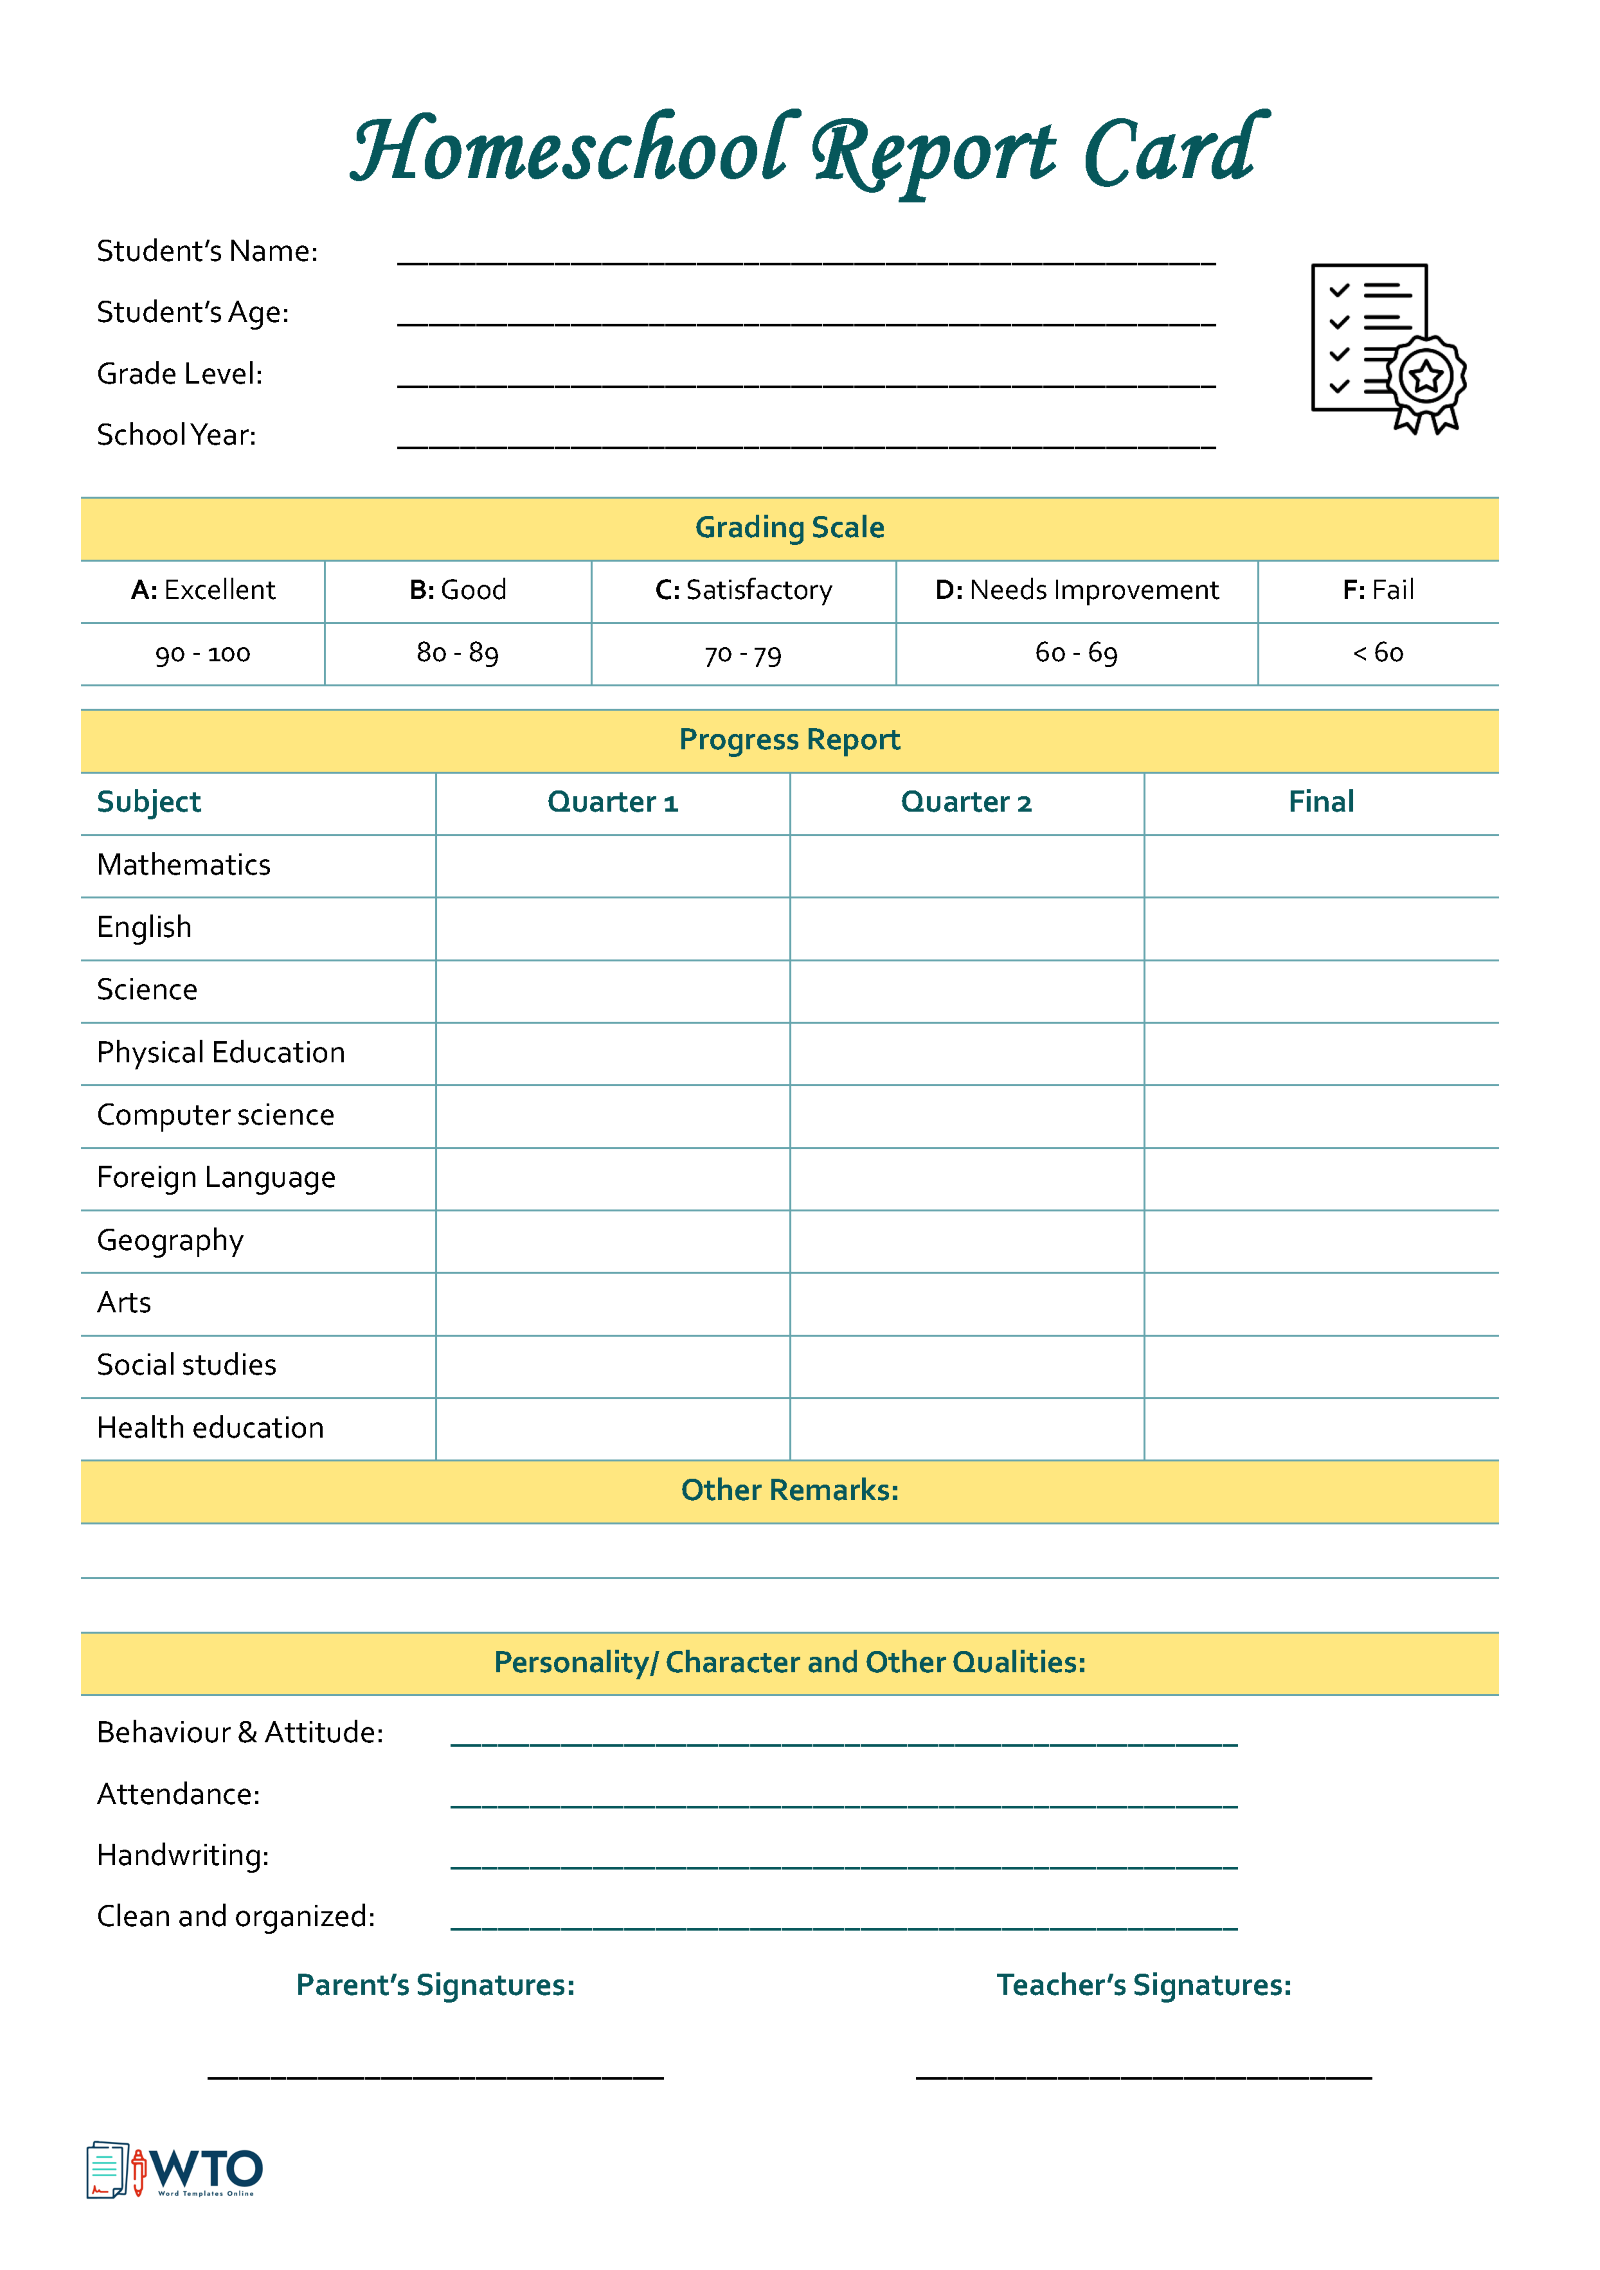 Sample Homeschool Report Card - Format Included